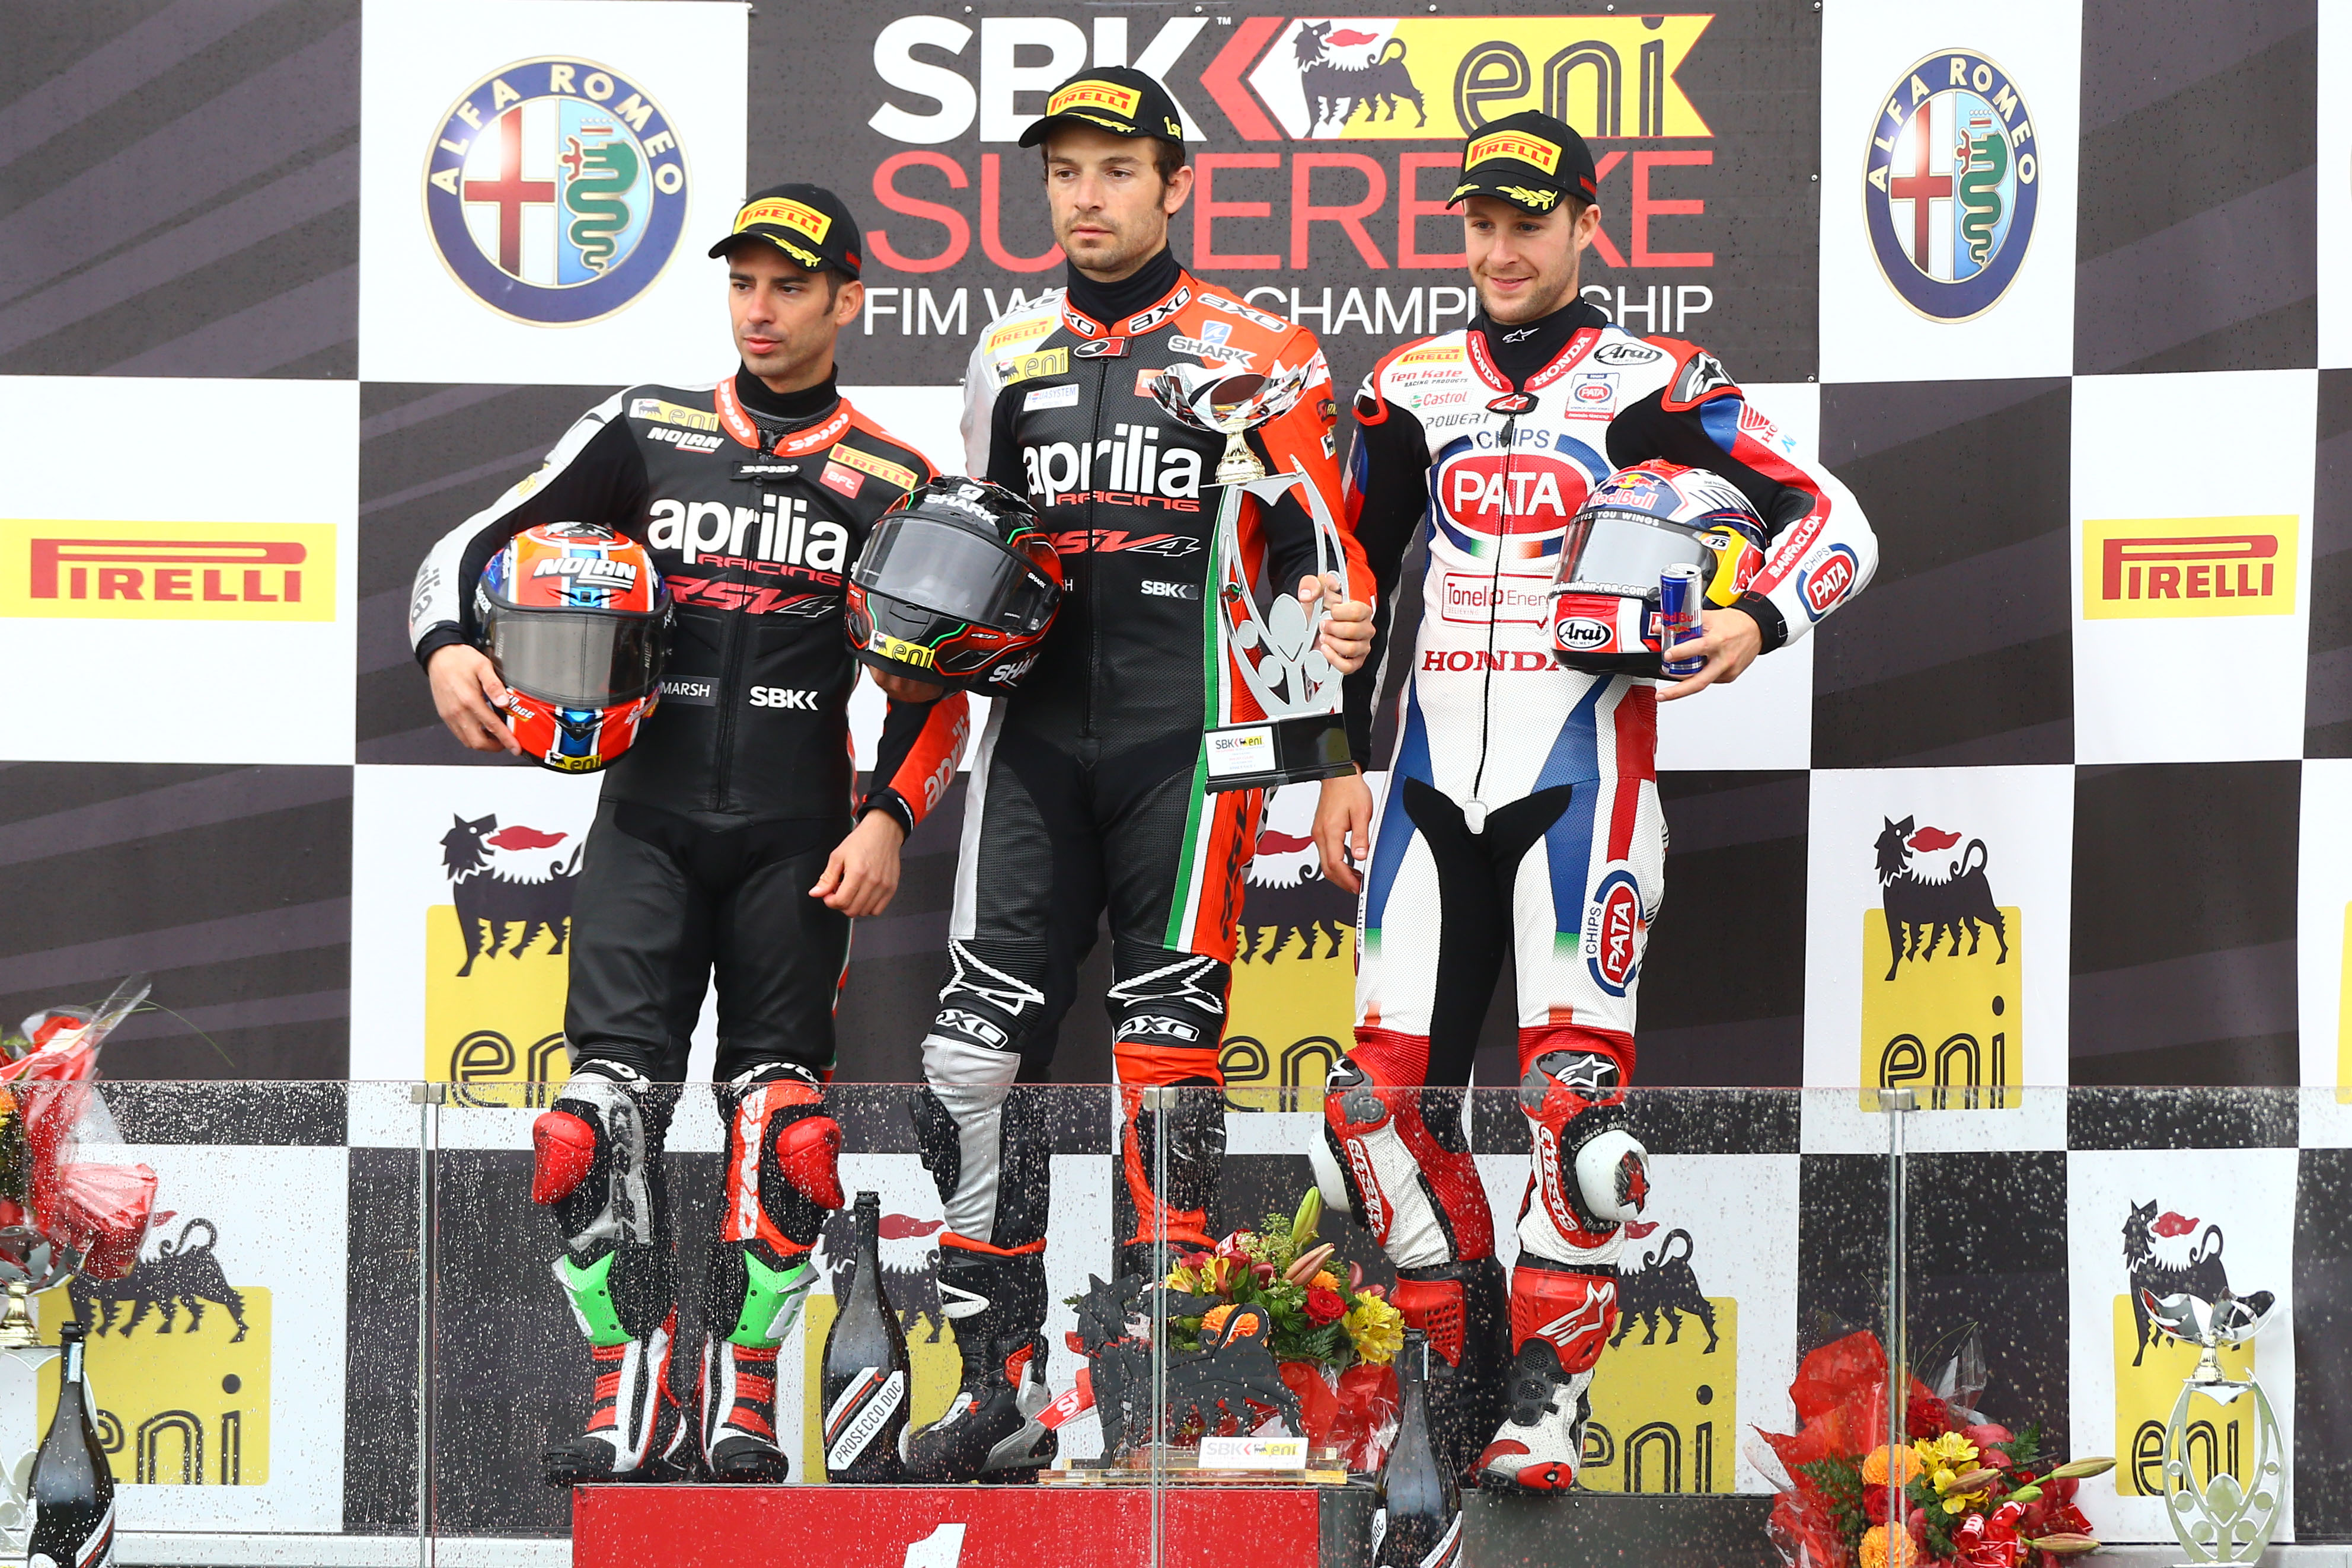 WSB 2014: Magny-Cours race 1 results